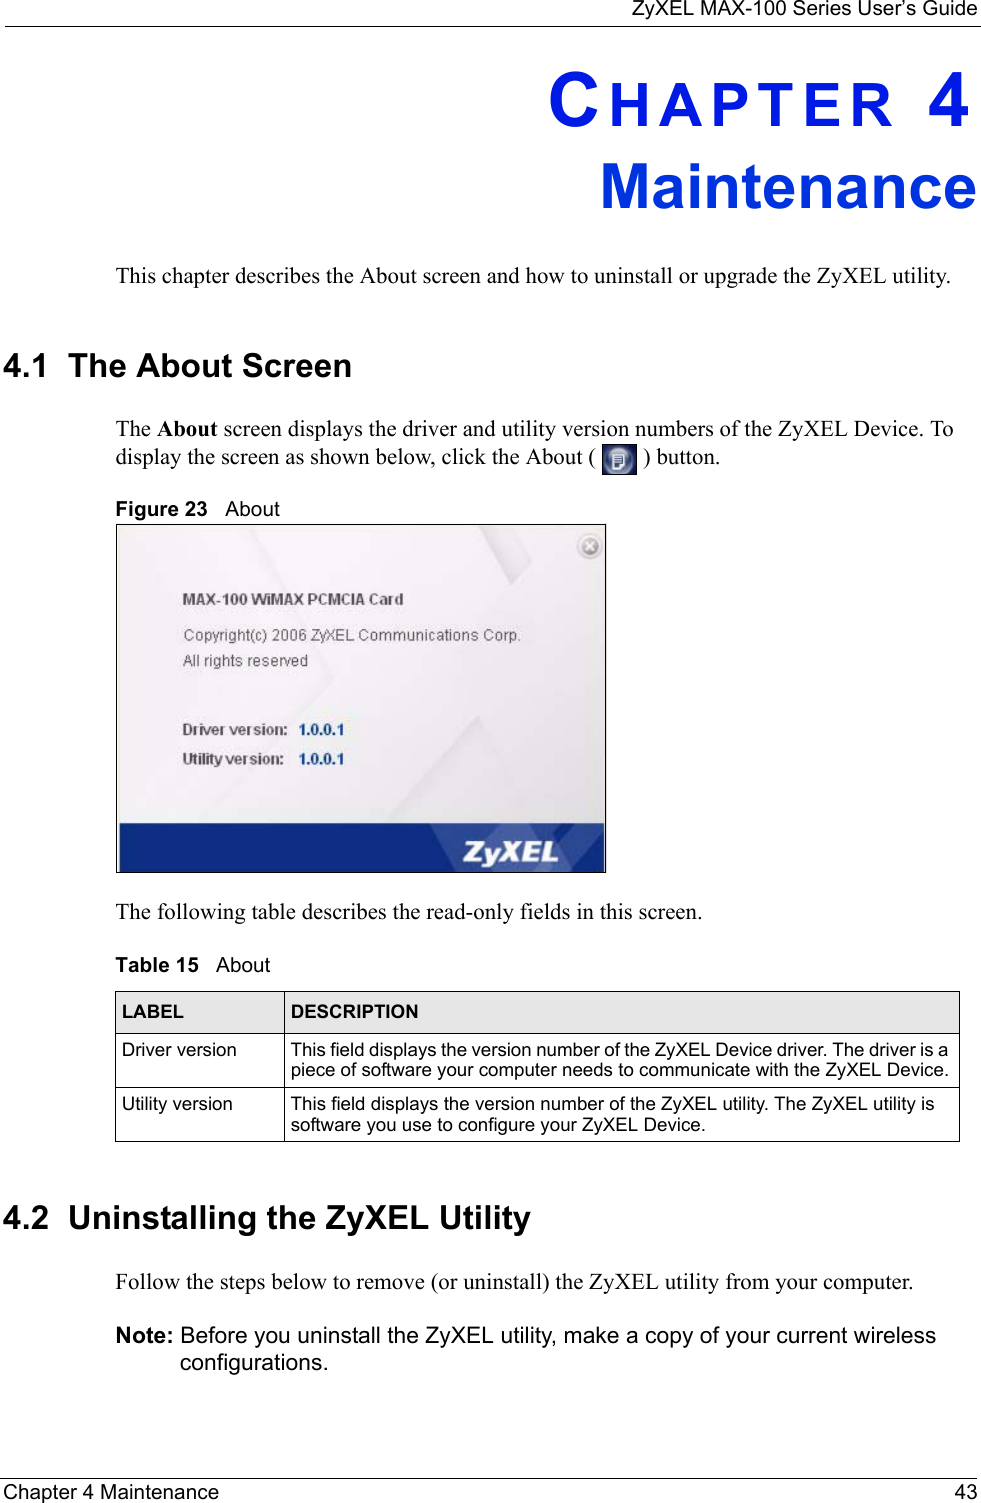 ZyXEL MAX-100 Series User’s GuideChapter 4 Maintenance 43CHAPTER 4MaintenanceThis chapter describes the About screen and how to uninstall or upgrade the ZyXEL utility.4.1  The About Screen The About screen displays the driver and utility version numbers of the ZyXEL Device. To display the screen as shown below, click the About (   ) button.Figure 23   About The following table describes the read-only fields in this screen. 4.2  Uninstalling the ZyXEL Utility Follow the steps below to remove (or uninstall) the ZyXEL utility from your computer.Note: Before you uninstall the ZyXEL utility, make a copy of your current wireless configurations.Table 15   About LABEL DESCRIPTIONDriver version This field displays the version number of the ZyXEL Device driver. The driver is a piece of software your computer needs to communicate with the ZyXEL Device.Utility version This field displays the version number of the ZyXEL utility. The ZyXEL utility is software you use to configure your ZyXEL Device.